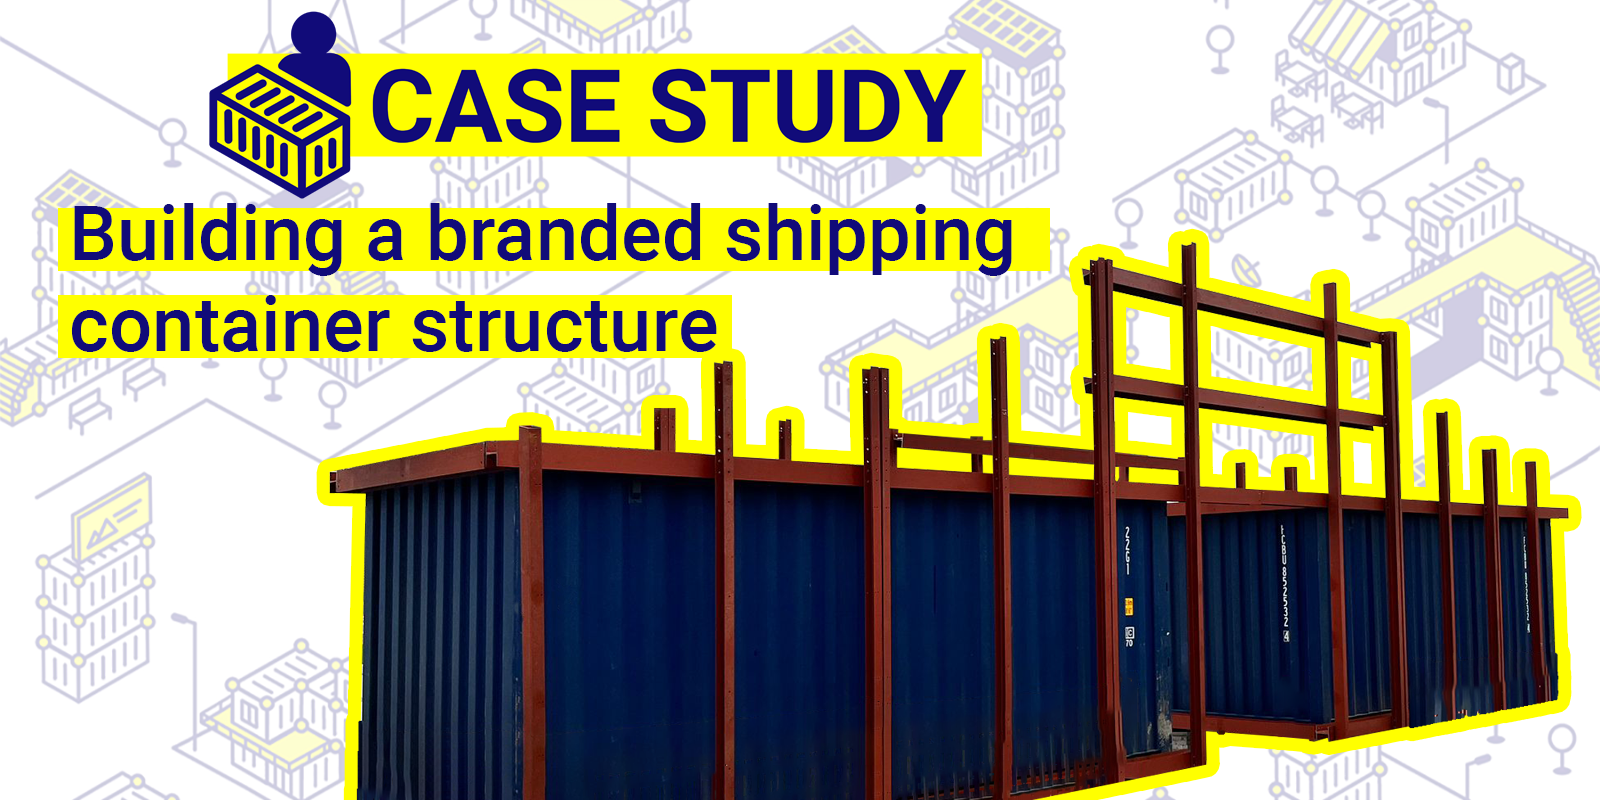 Building a branded shipping container structure